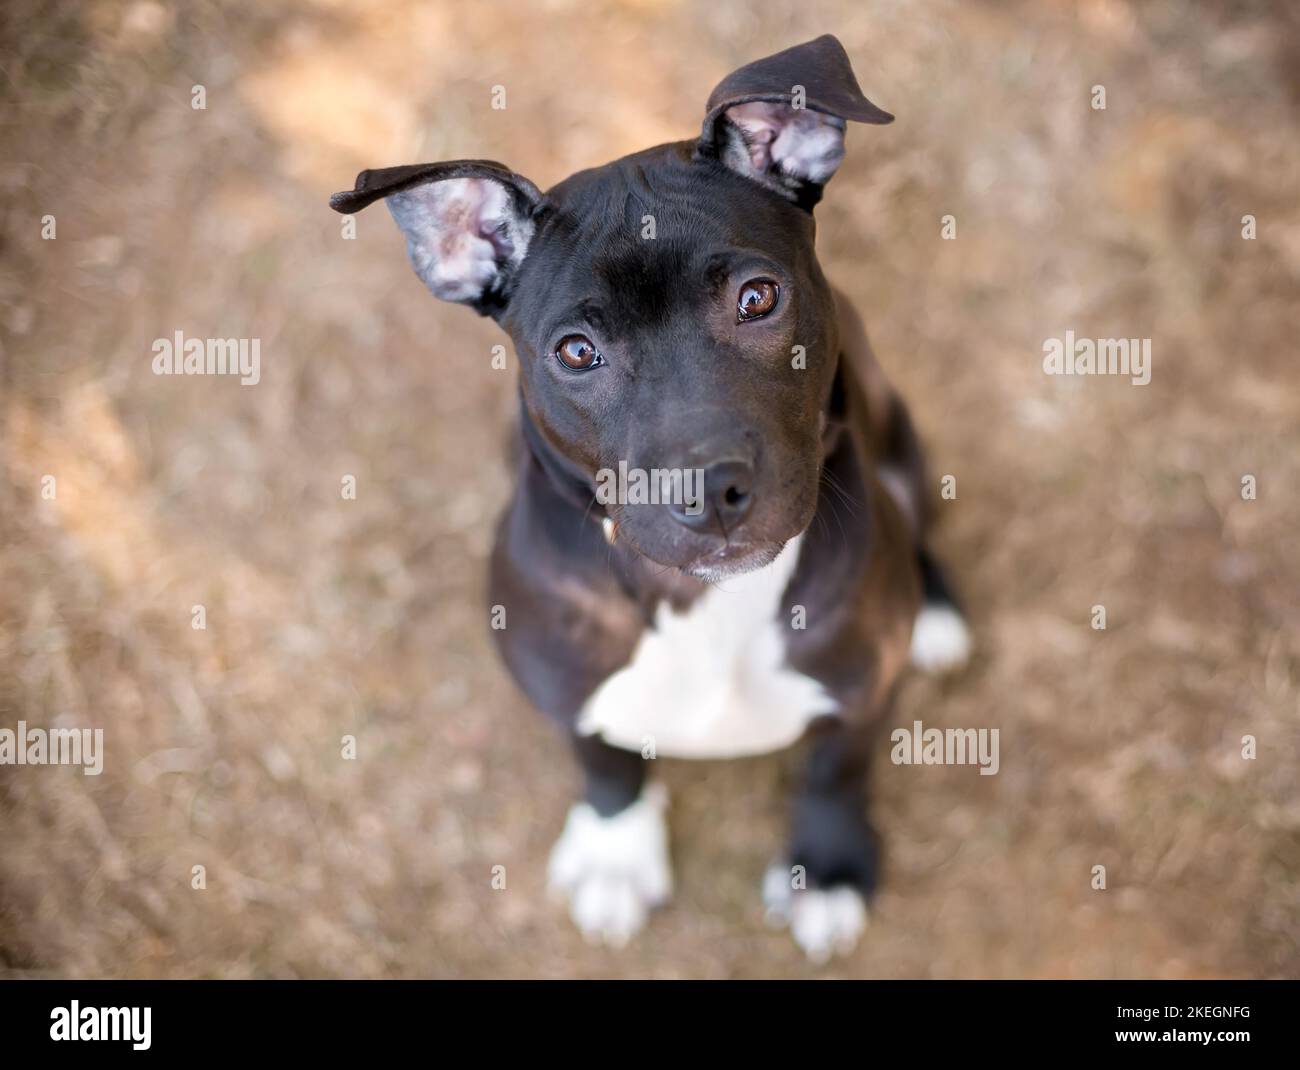 A young black and white Pit Bull Terrier mixed breed dog with floppy ears looking up at the camera with a head tilt Stock Photo